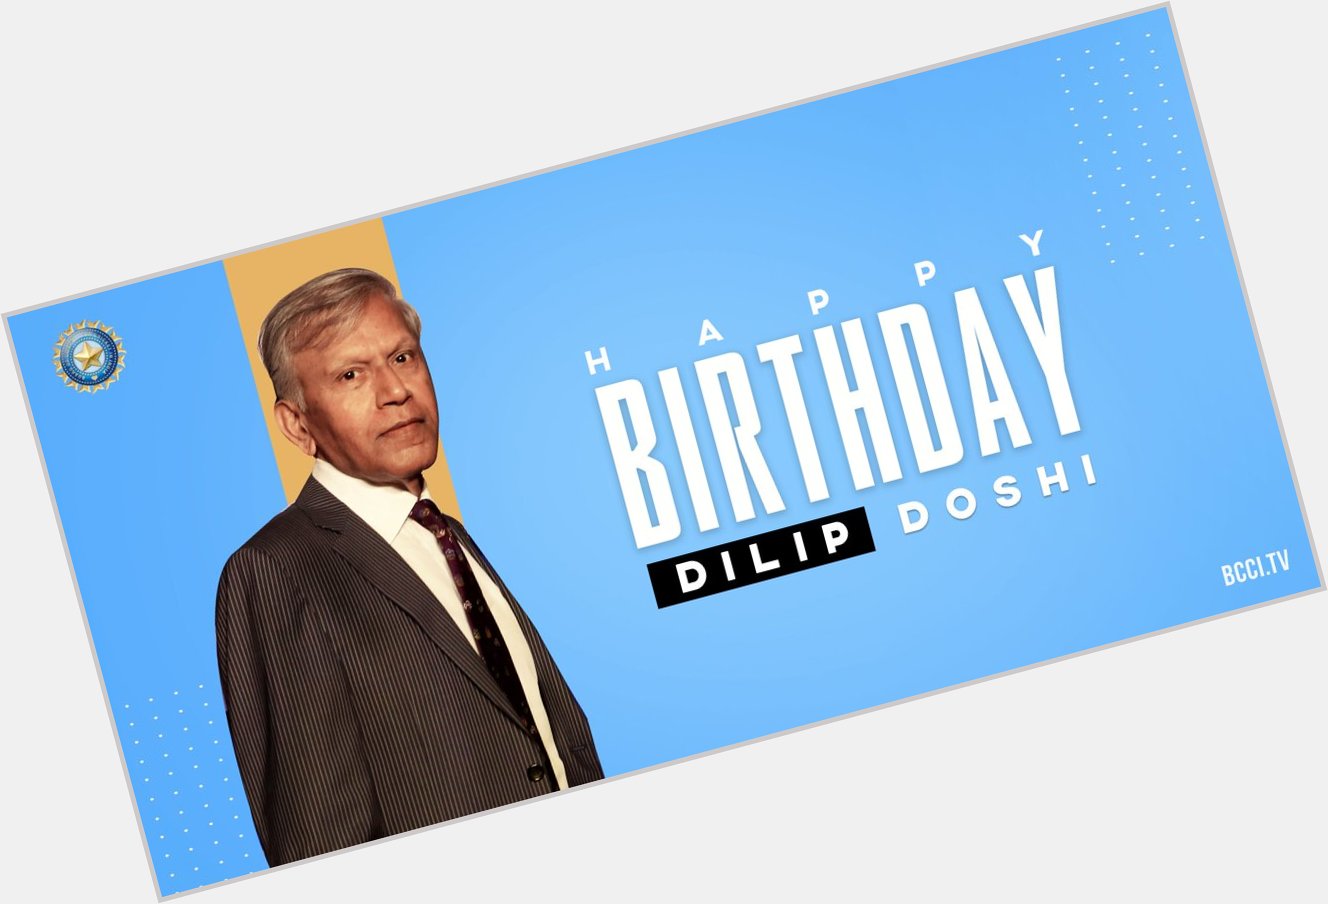 Happy Birthday to former Indian cricketer and formidable off-spinner Dilip Doshi 